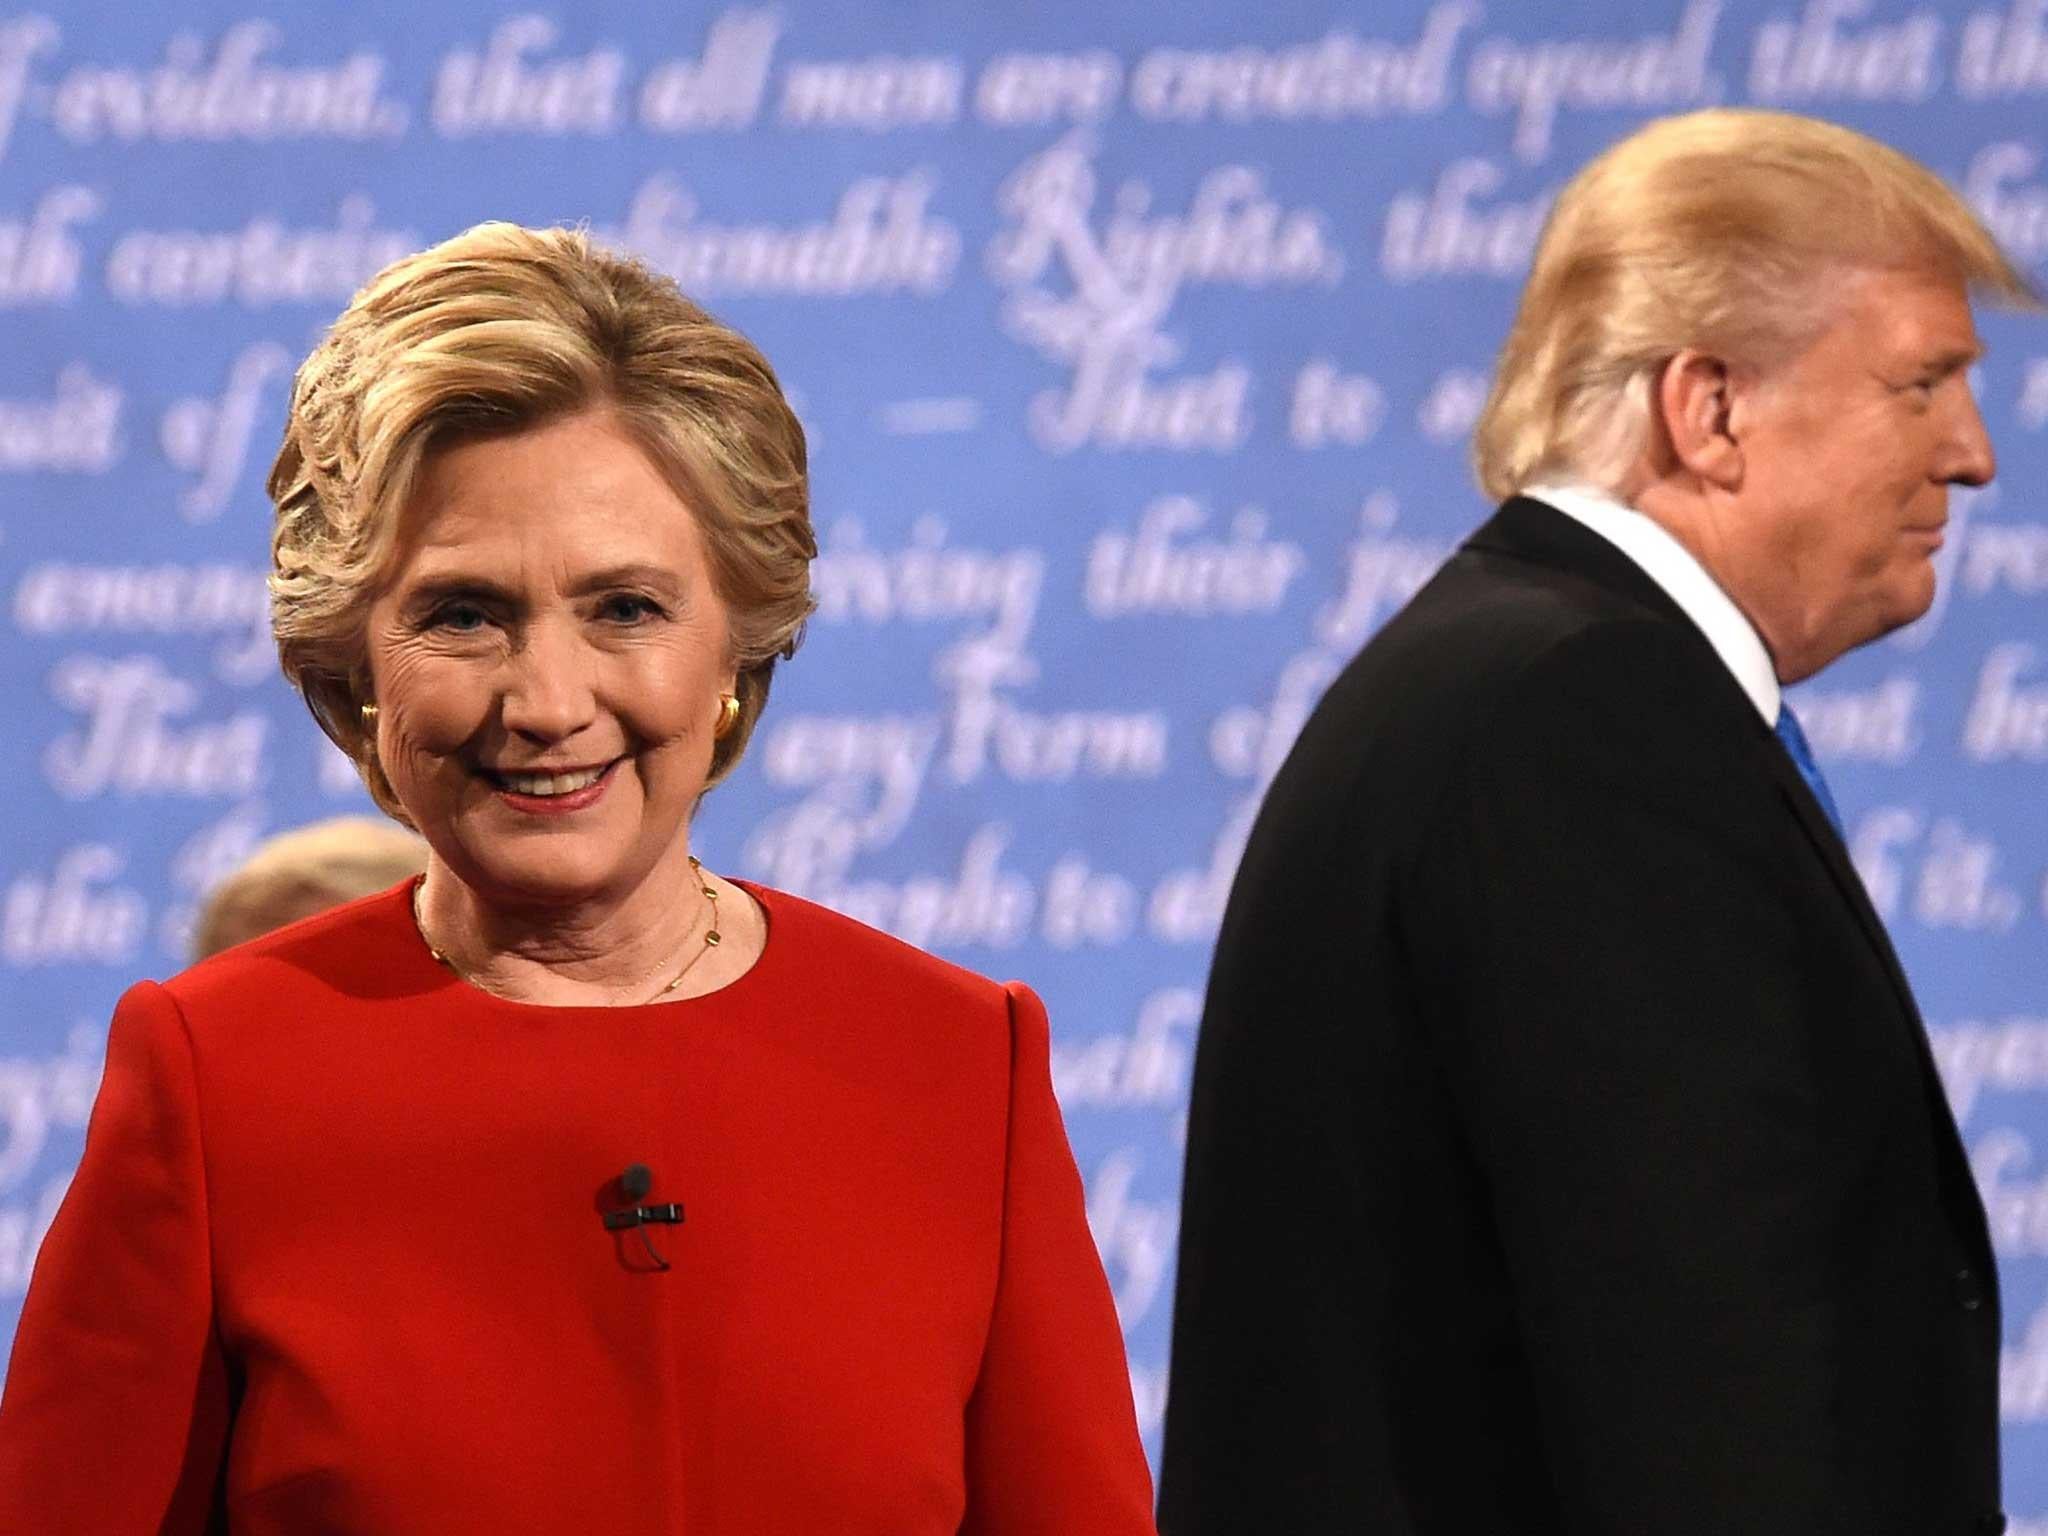 Trump and Clinton will go head to head for a second time